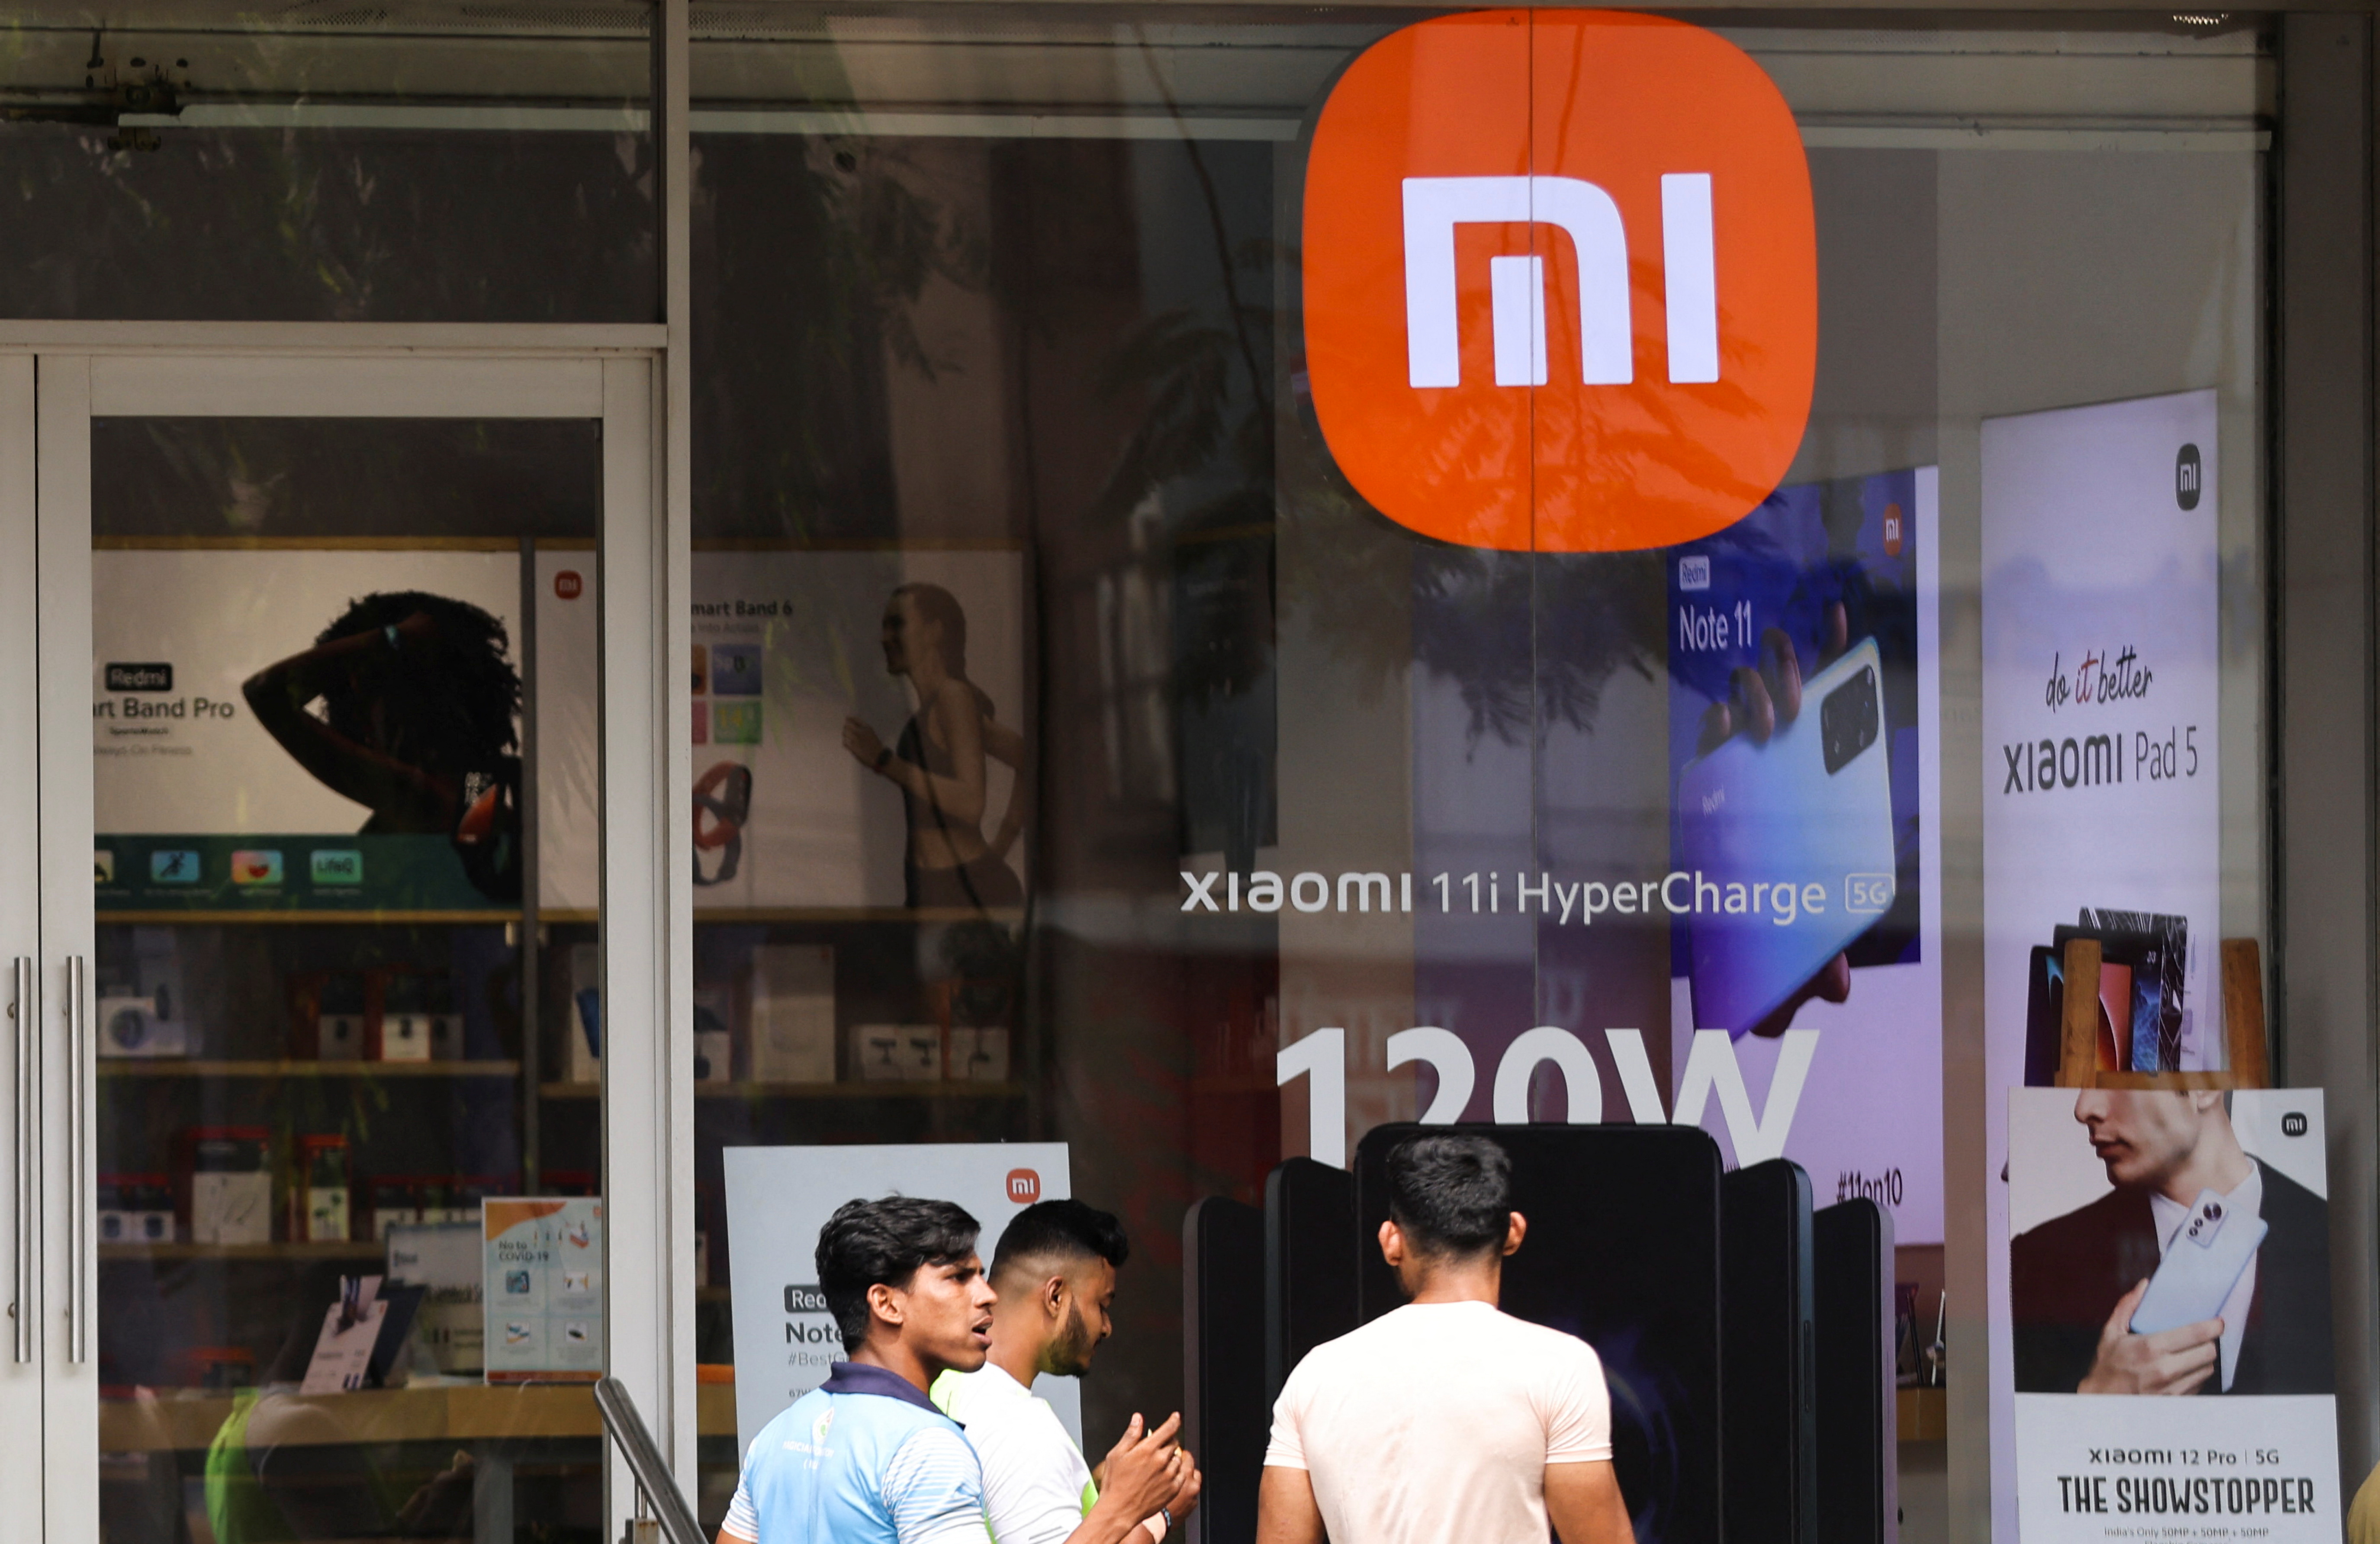 People walk past Xiaomi, a Chinese manufacturer of consumer electronics, store in Mumbai